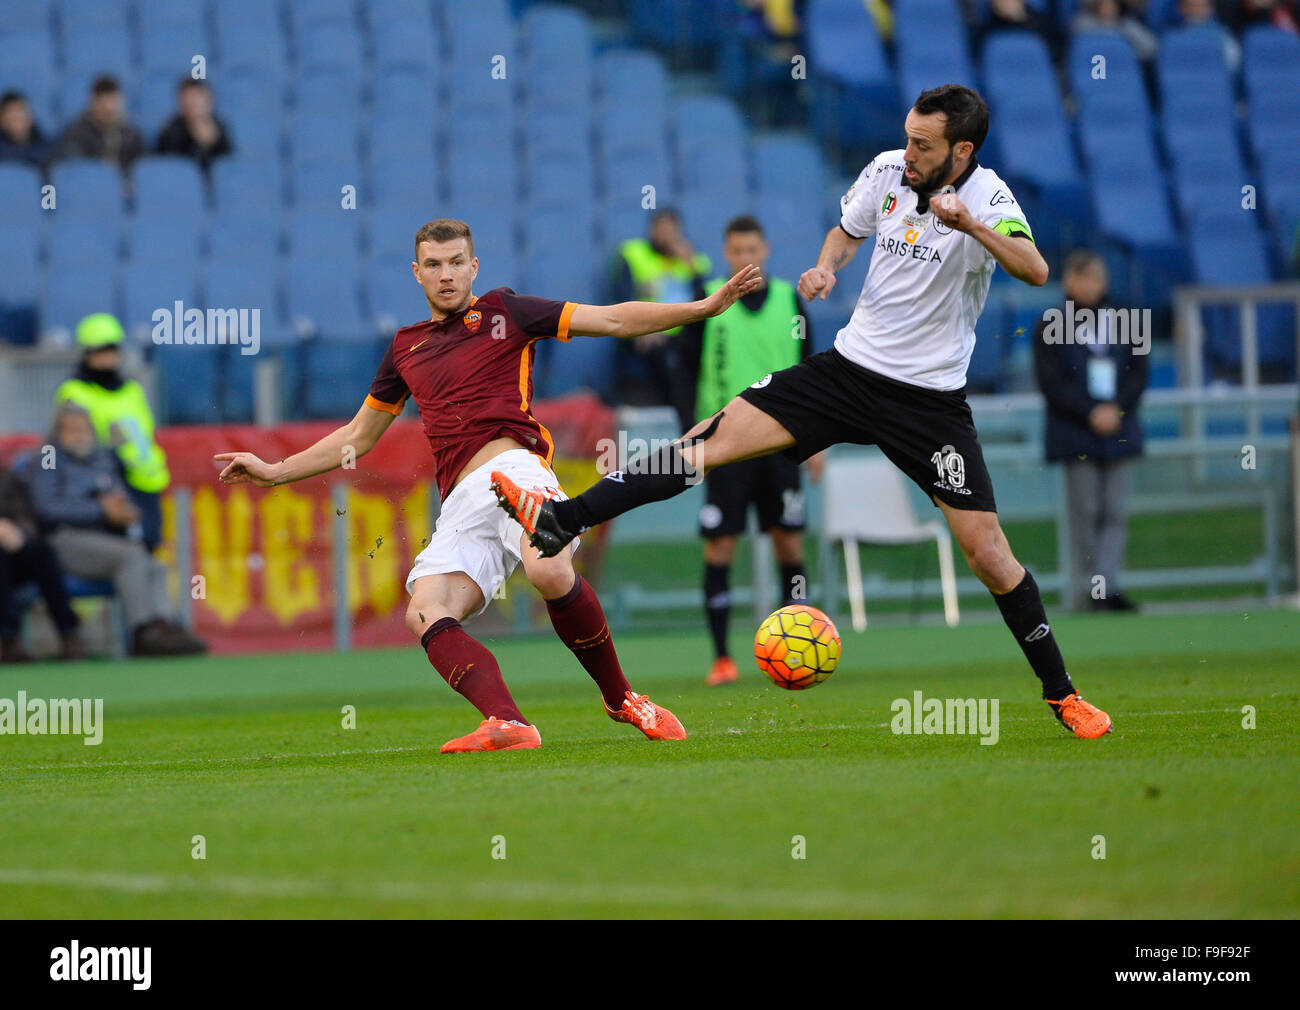 Rome, Italy. 16th Dec, 2015. Edin Dzeko during the Italian Cup football match A.S. Roma vs A.S. Spezia at the Olympic Stadium in Rome, on december 16, 2015. Credit:  Silvia Lore'/Alamy Live News Stock Photo